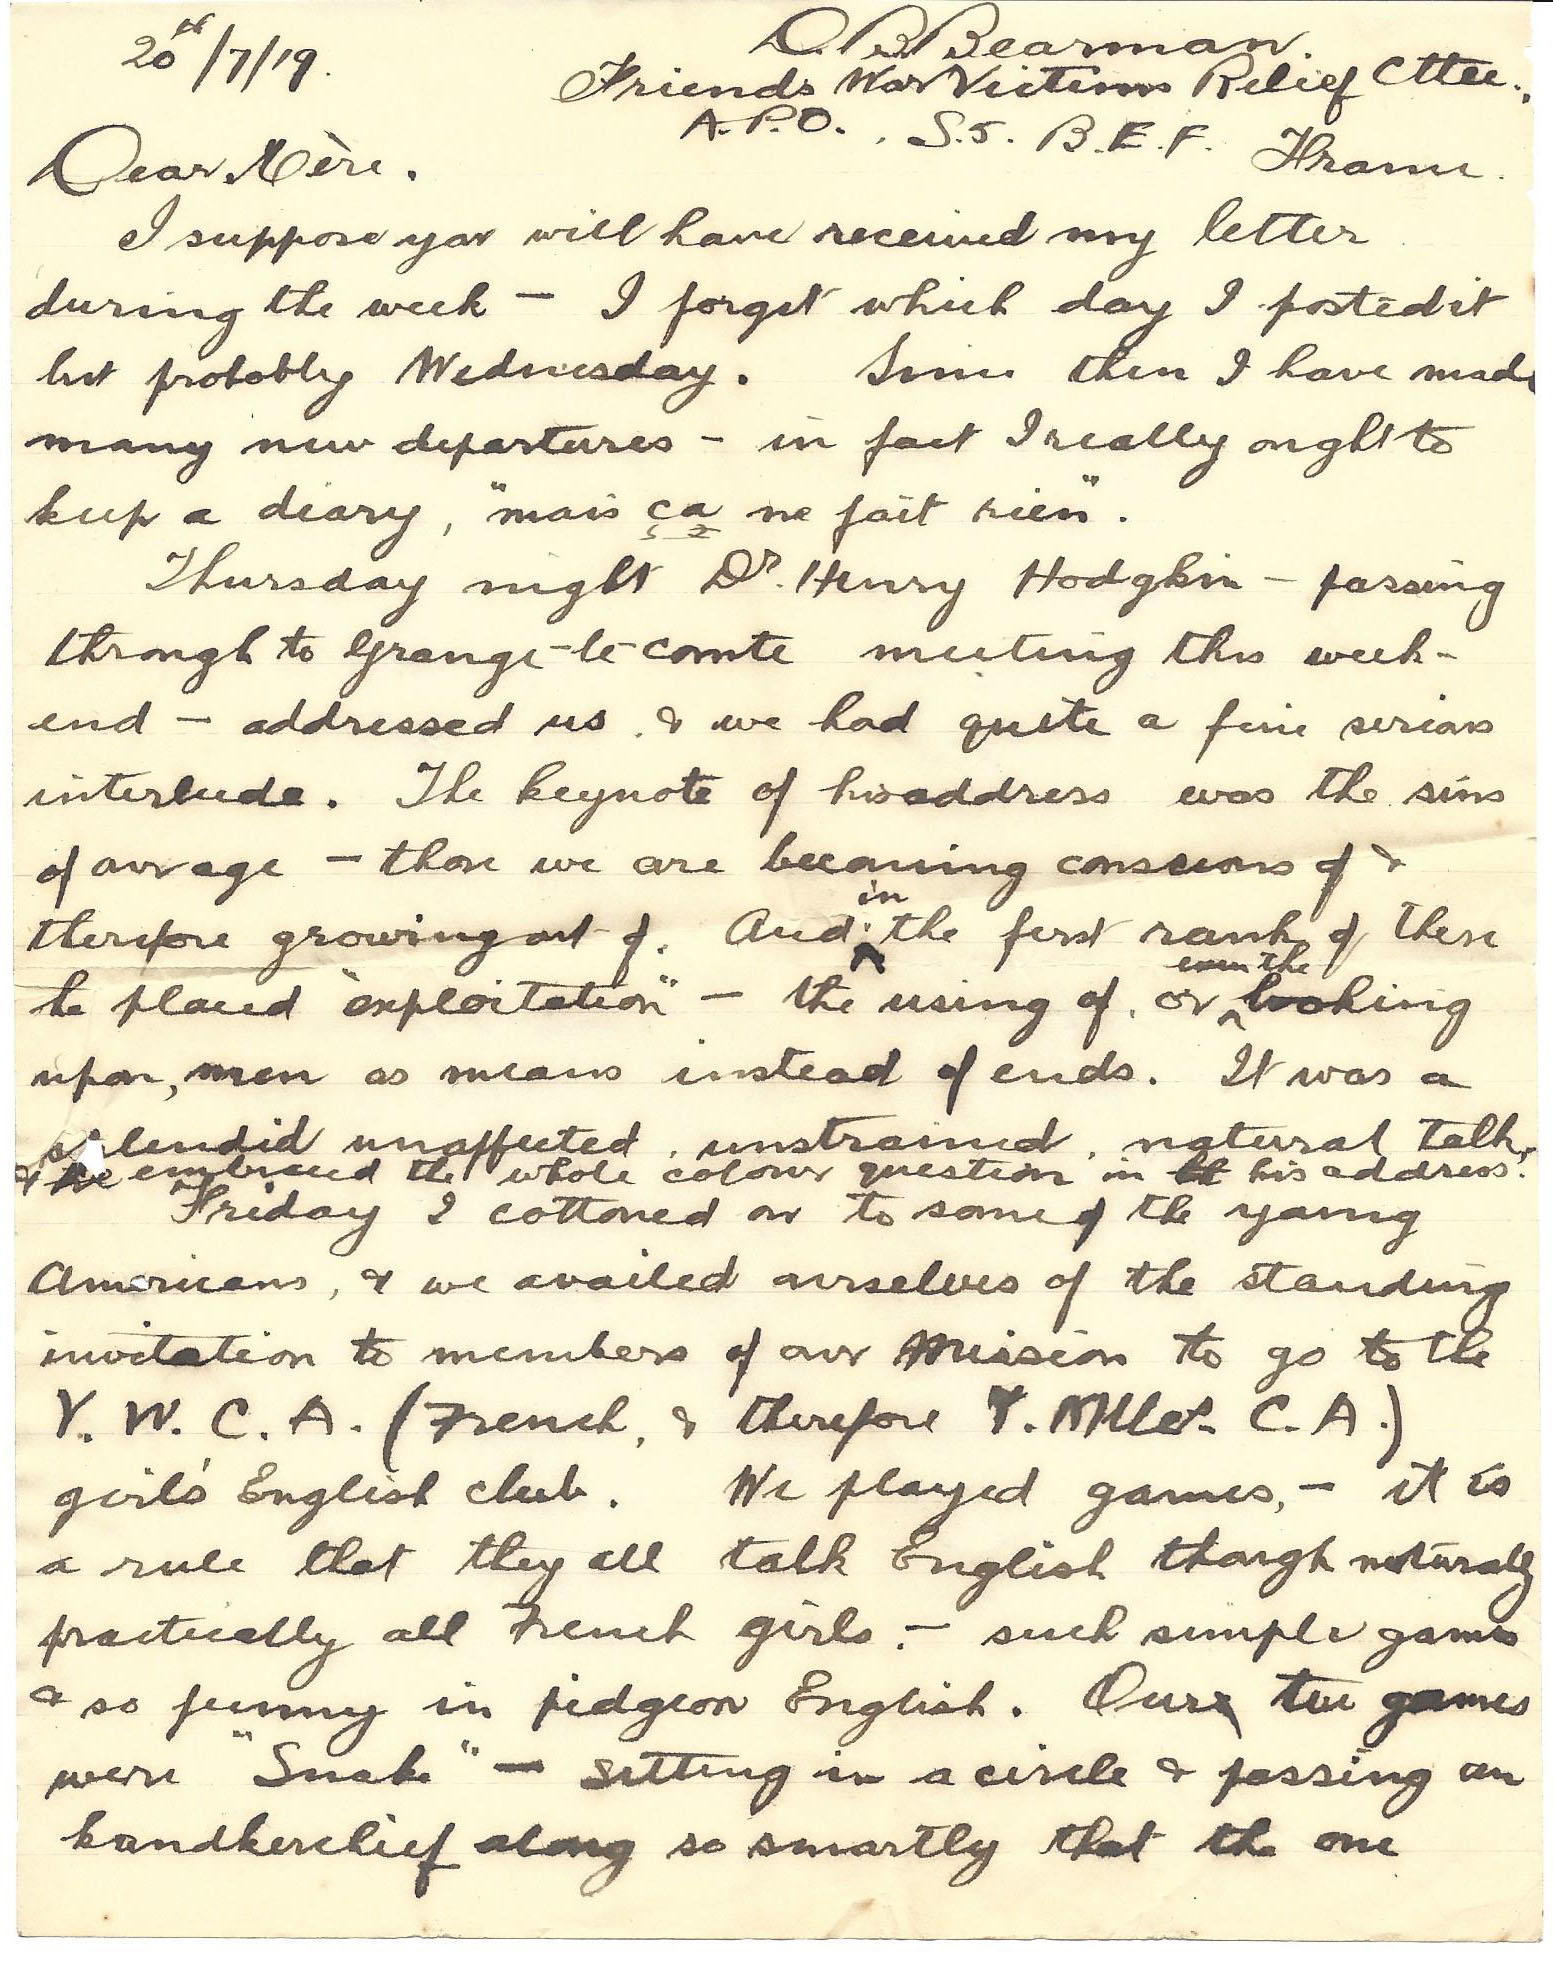 1919-07-20 p1 Donald Bearman letter to his father